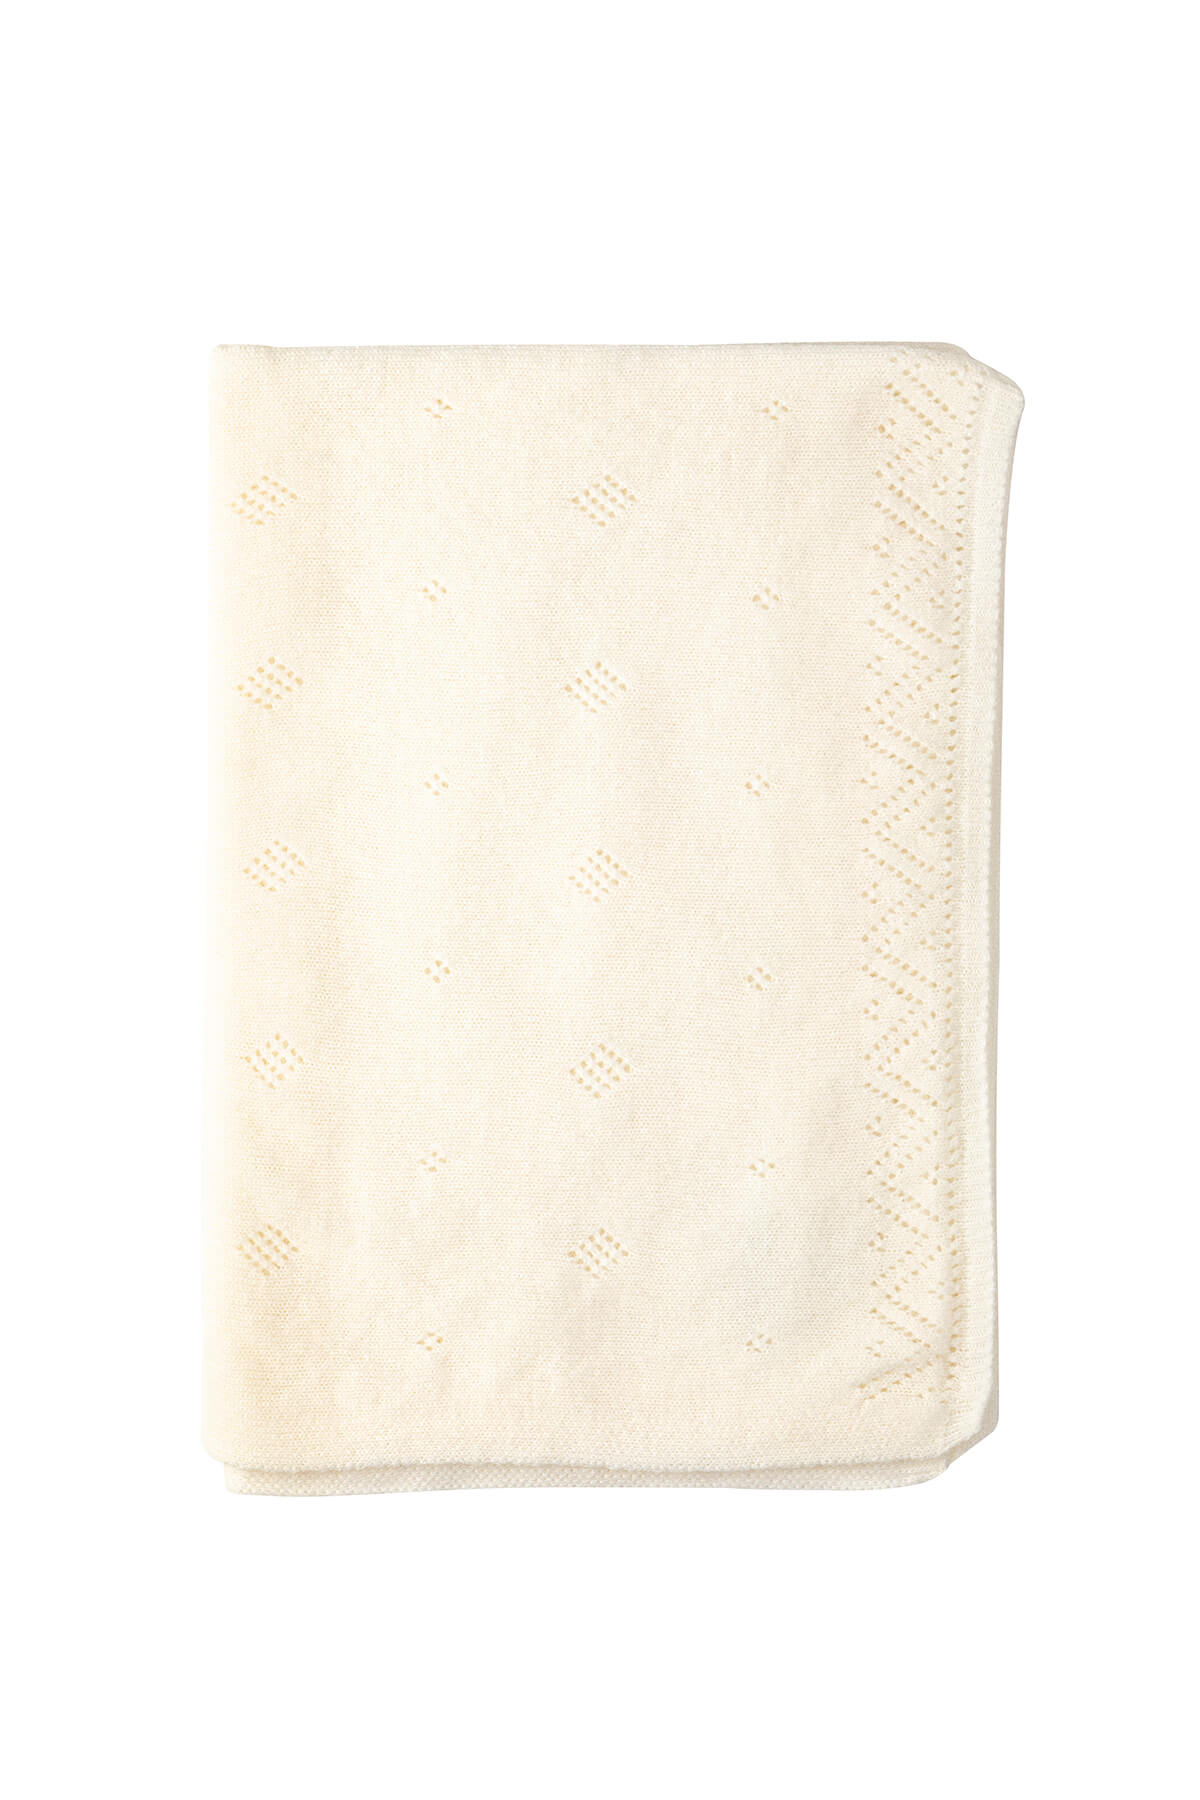 Johnstons of Elgin Gauzy Knit Cashmere Baby Blanket with Pointelle Details in Ecru on white background HAA019042276ONE